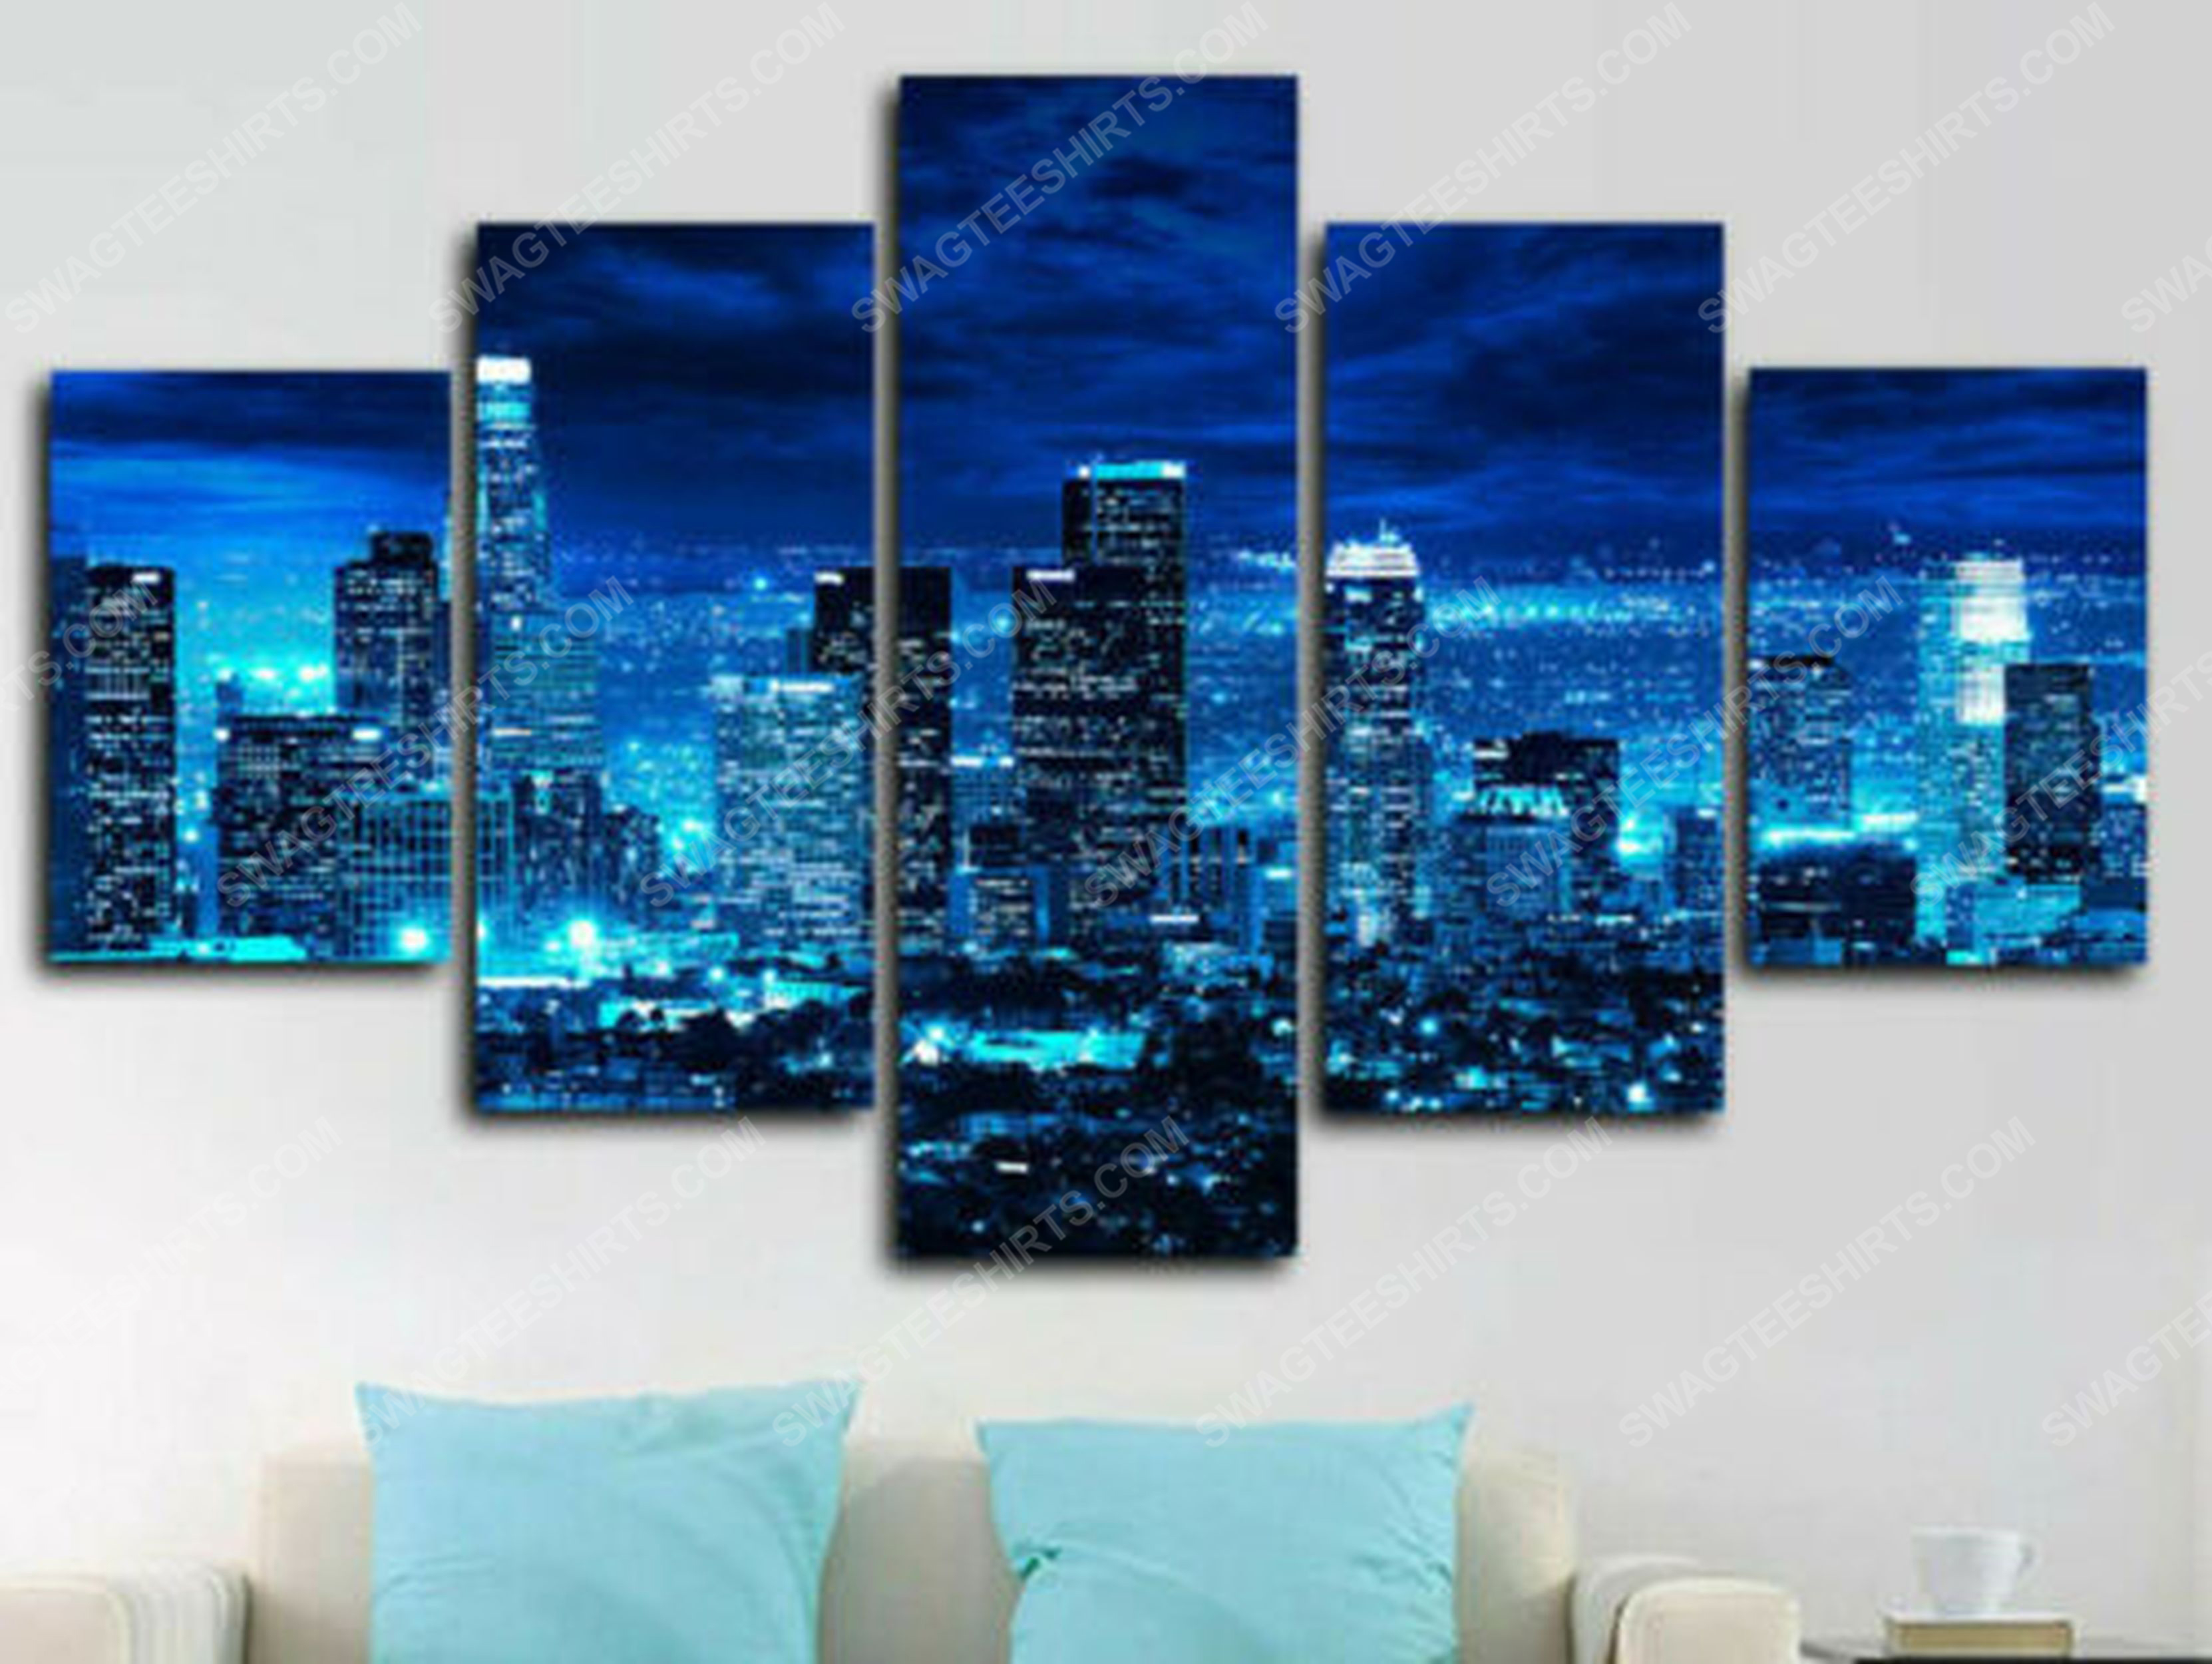 [special edition] Los angeles skyline at night canvas wall art home decor- maria